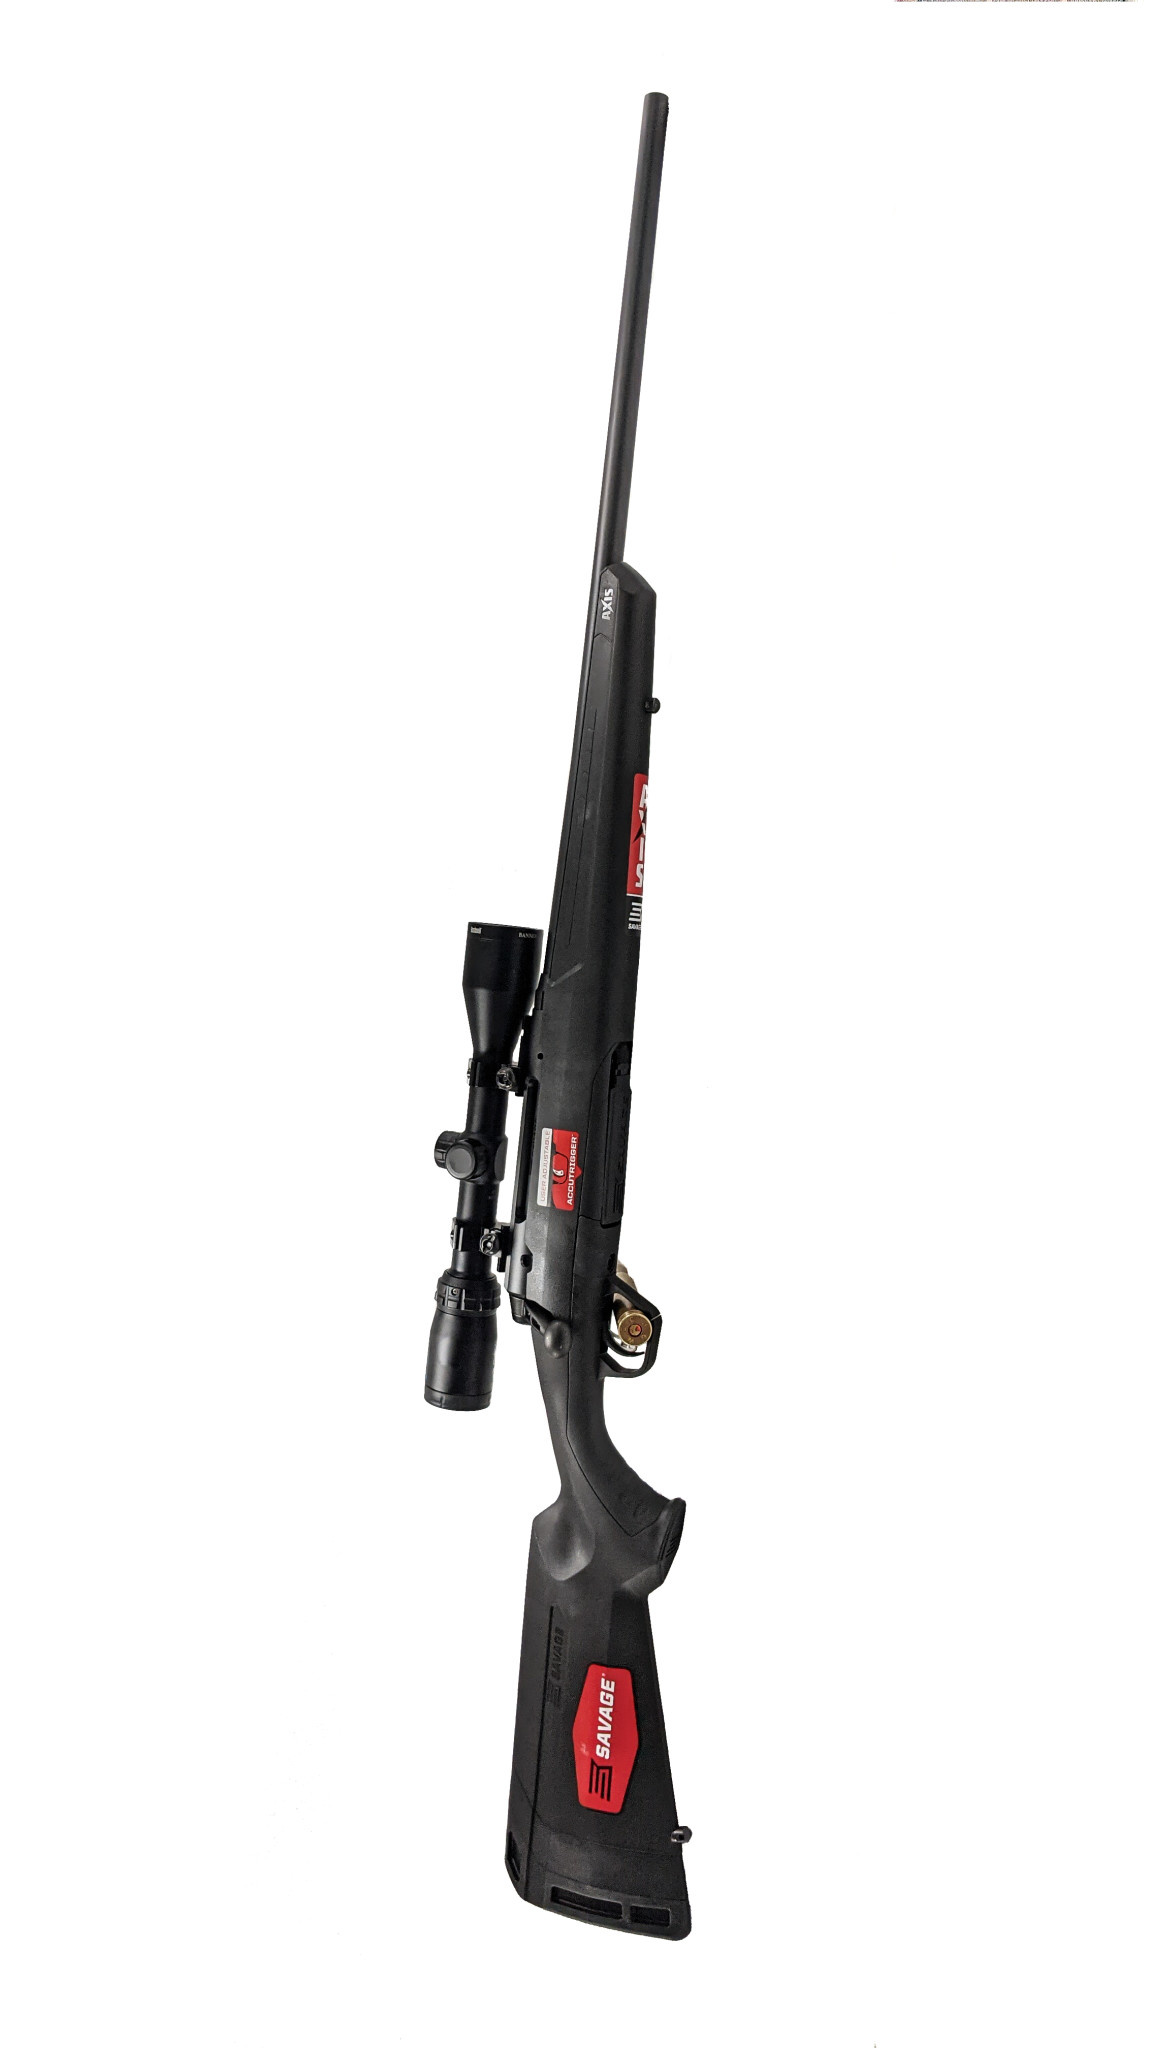 Savage Axis II w/ Bushnell Scope 7mm-08